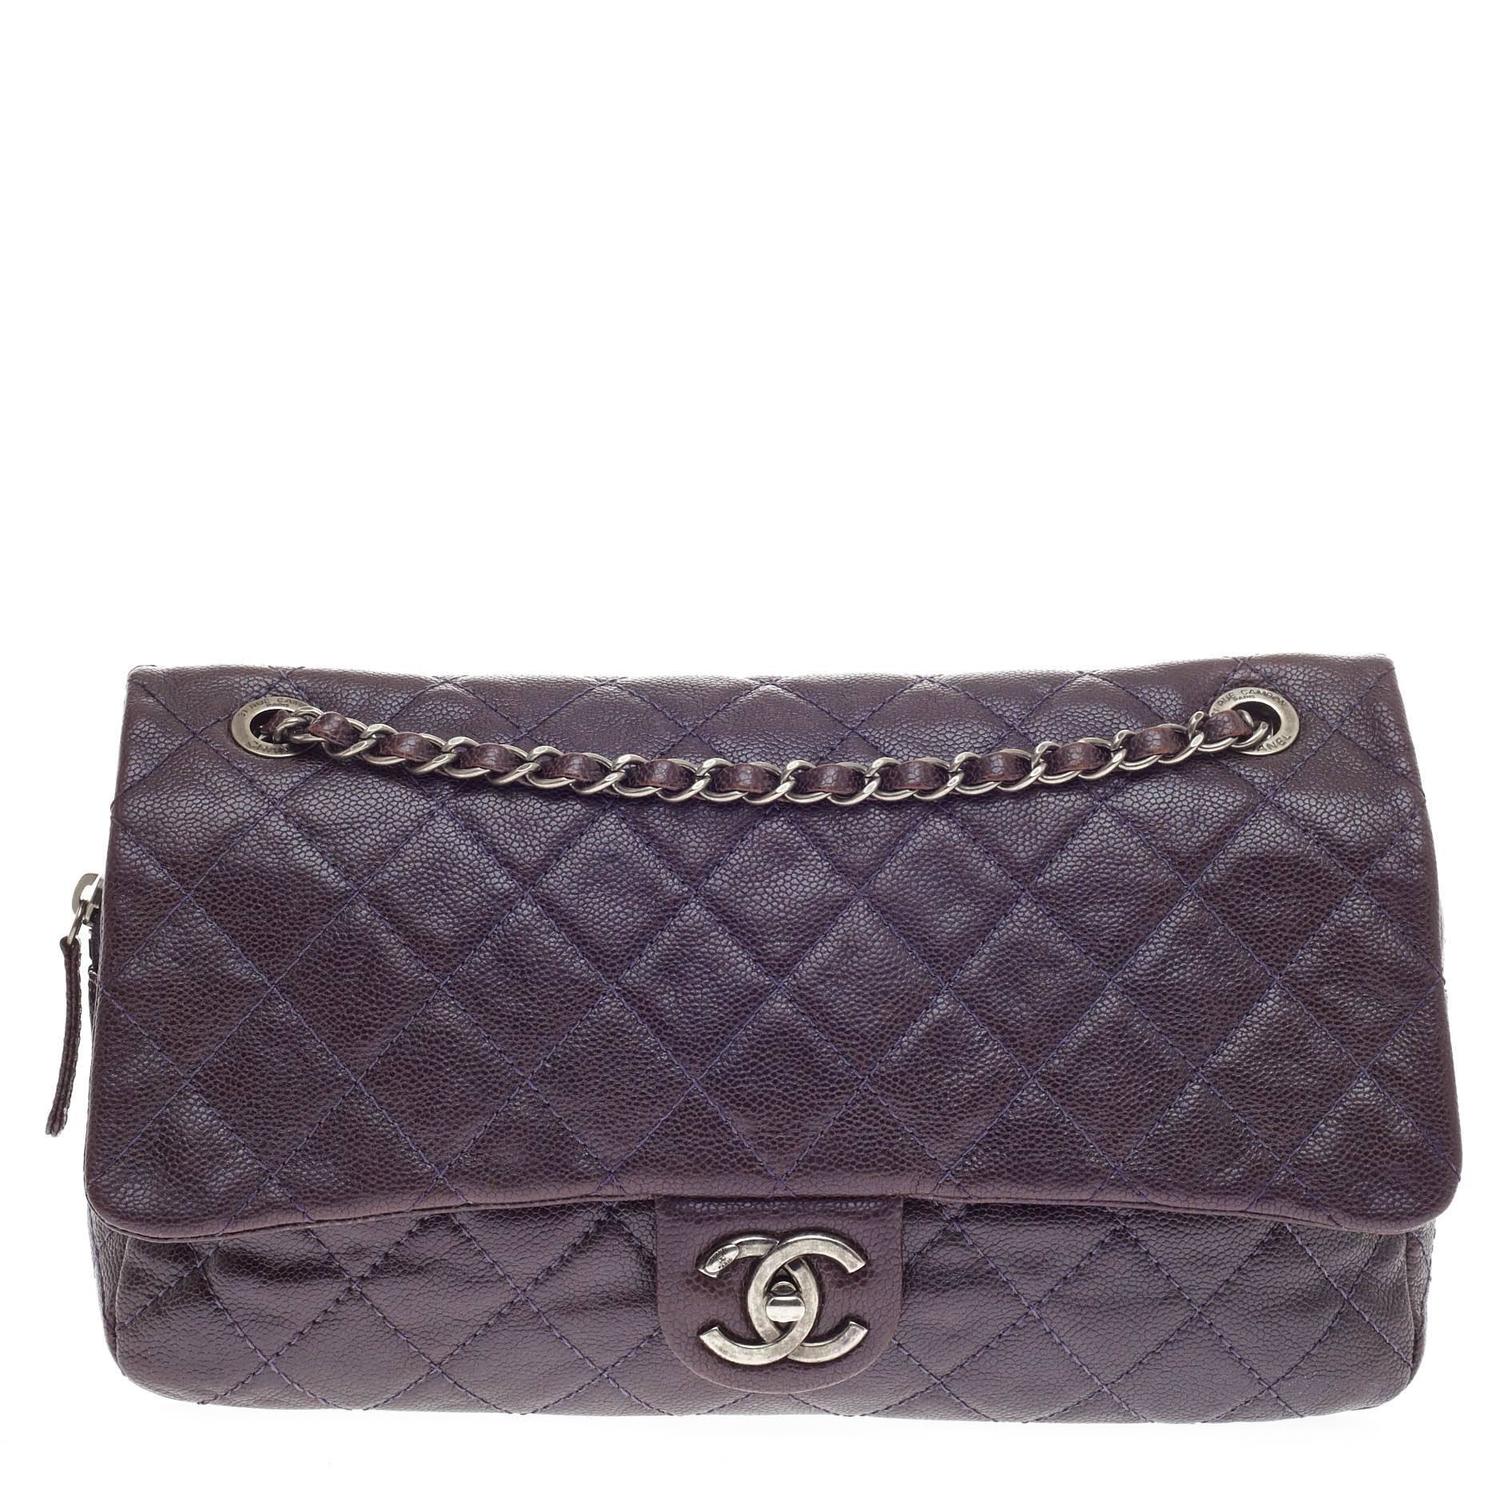 Used Chanel Bags Near Me | Jaguar Clubs of North America